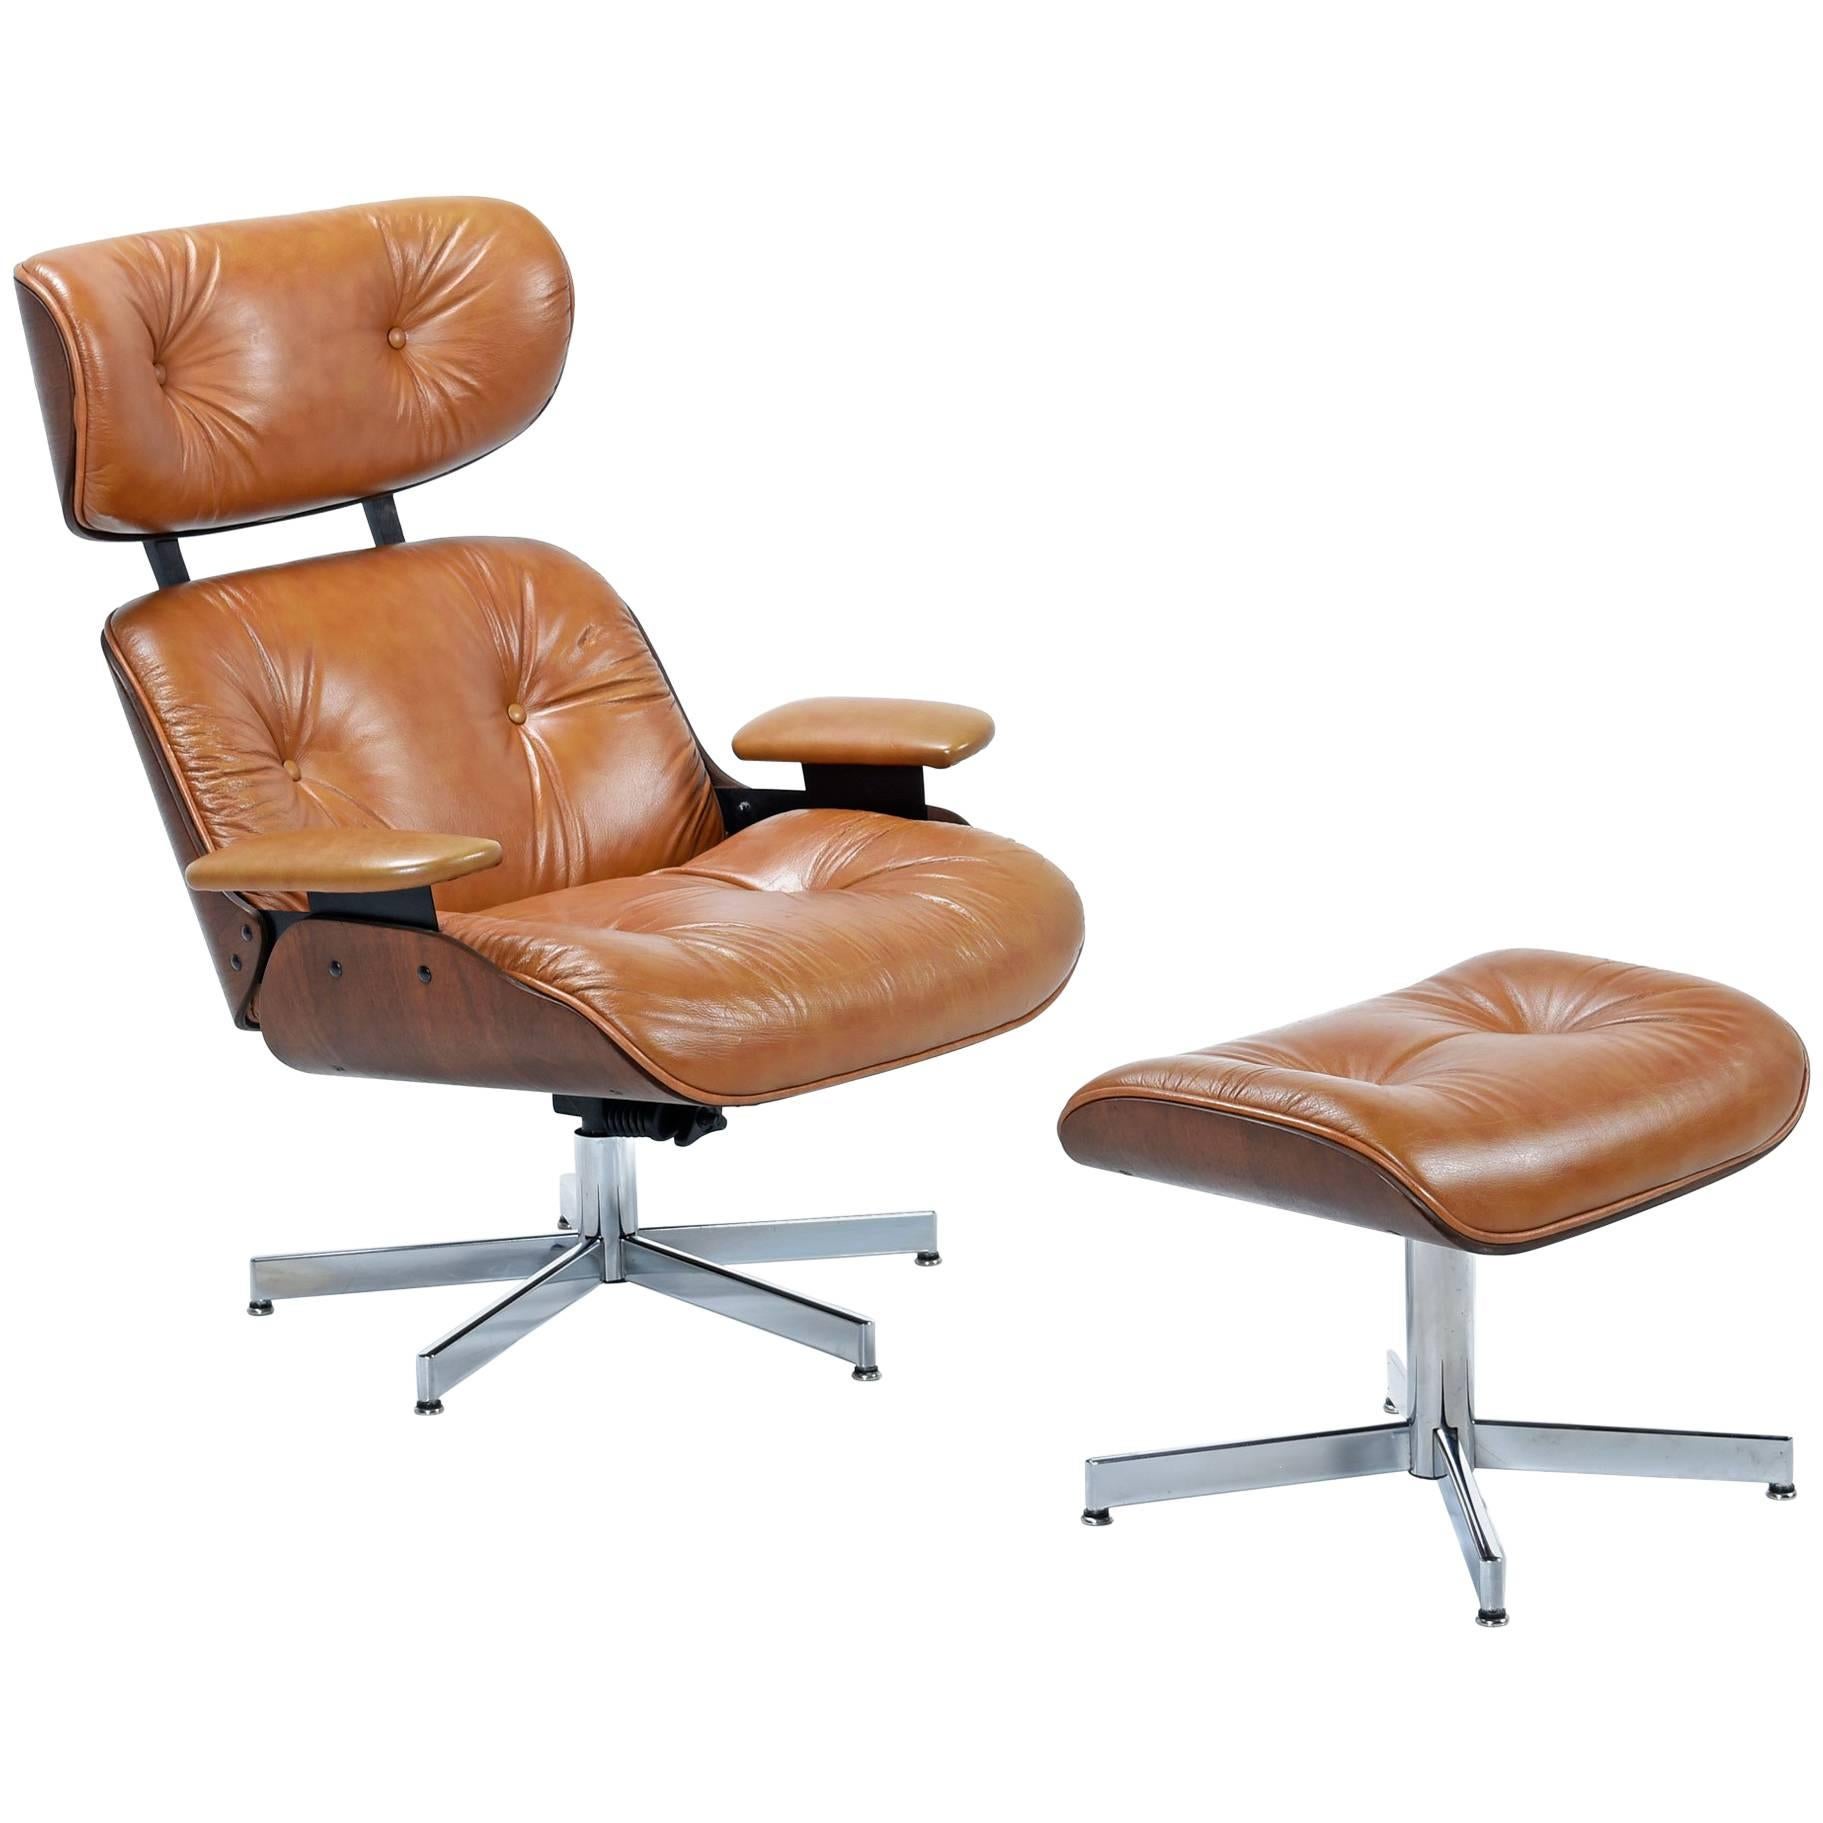 Mid-Century Modern Eames Style Lounge Chair and Ottoman